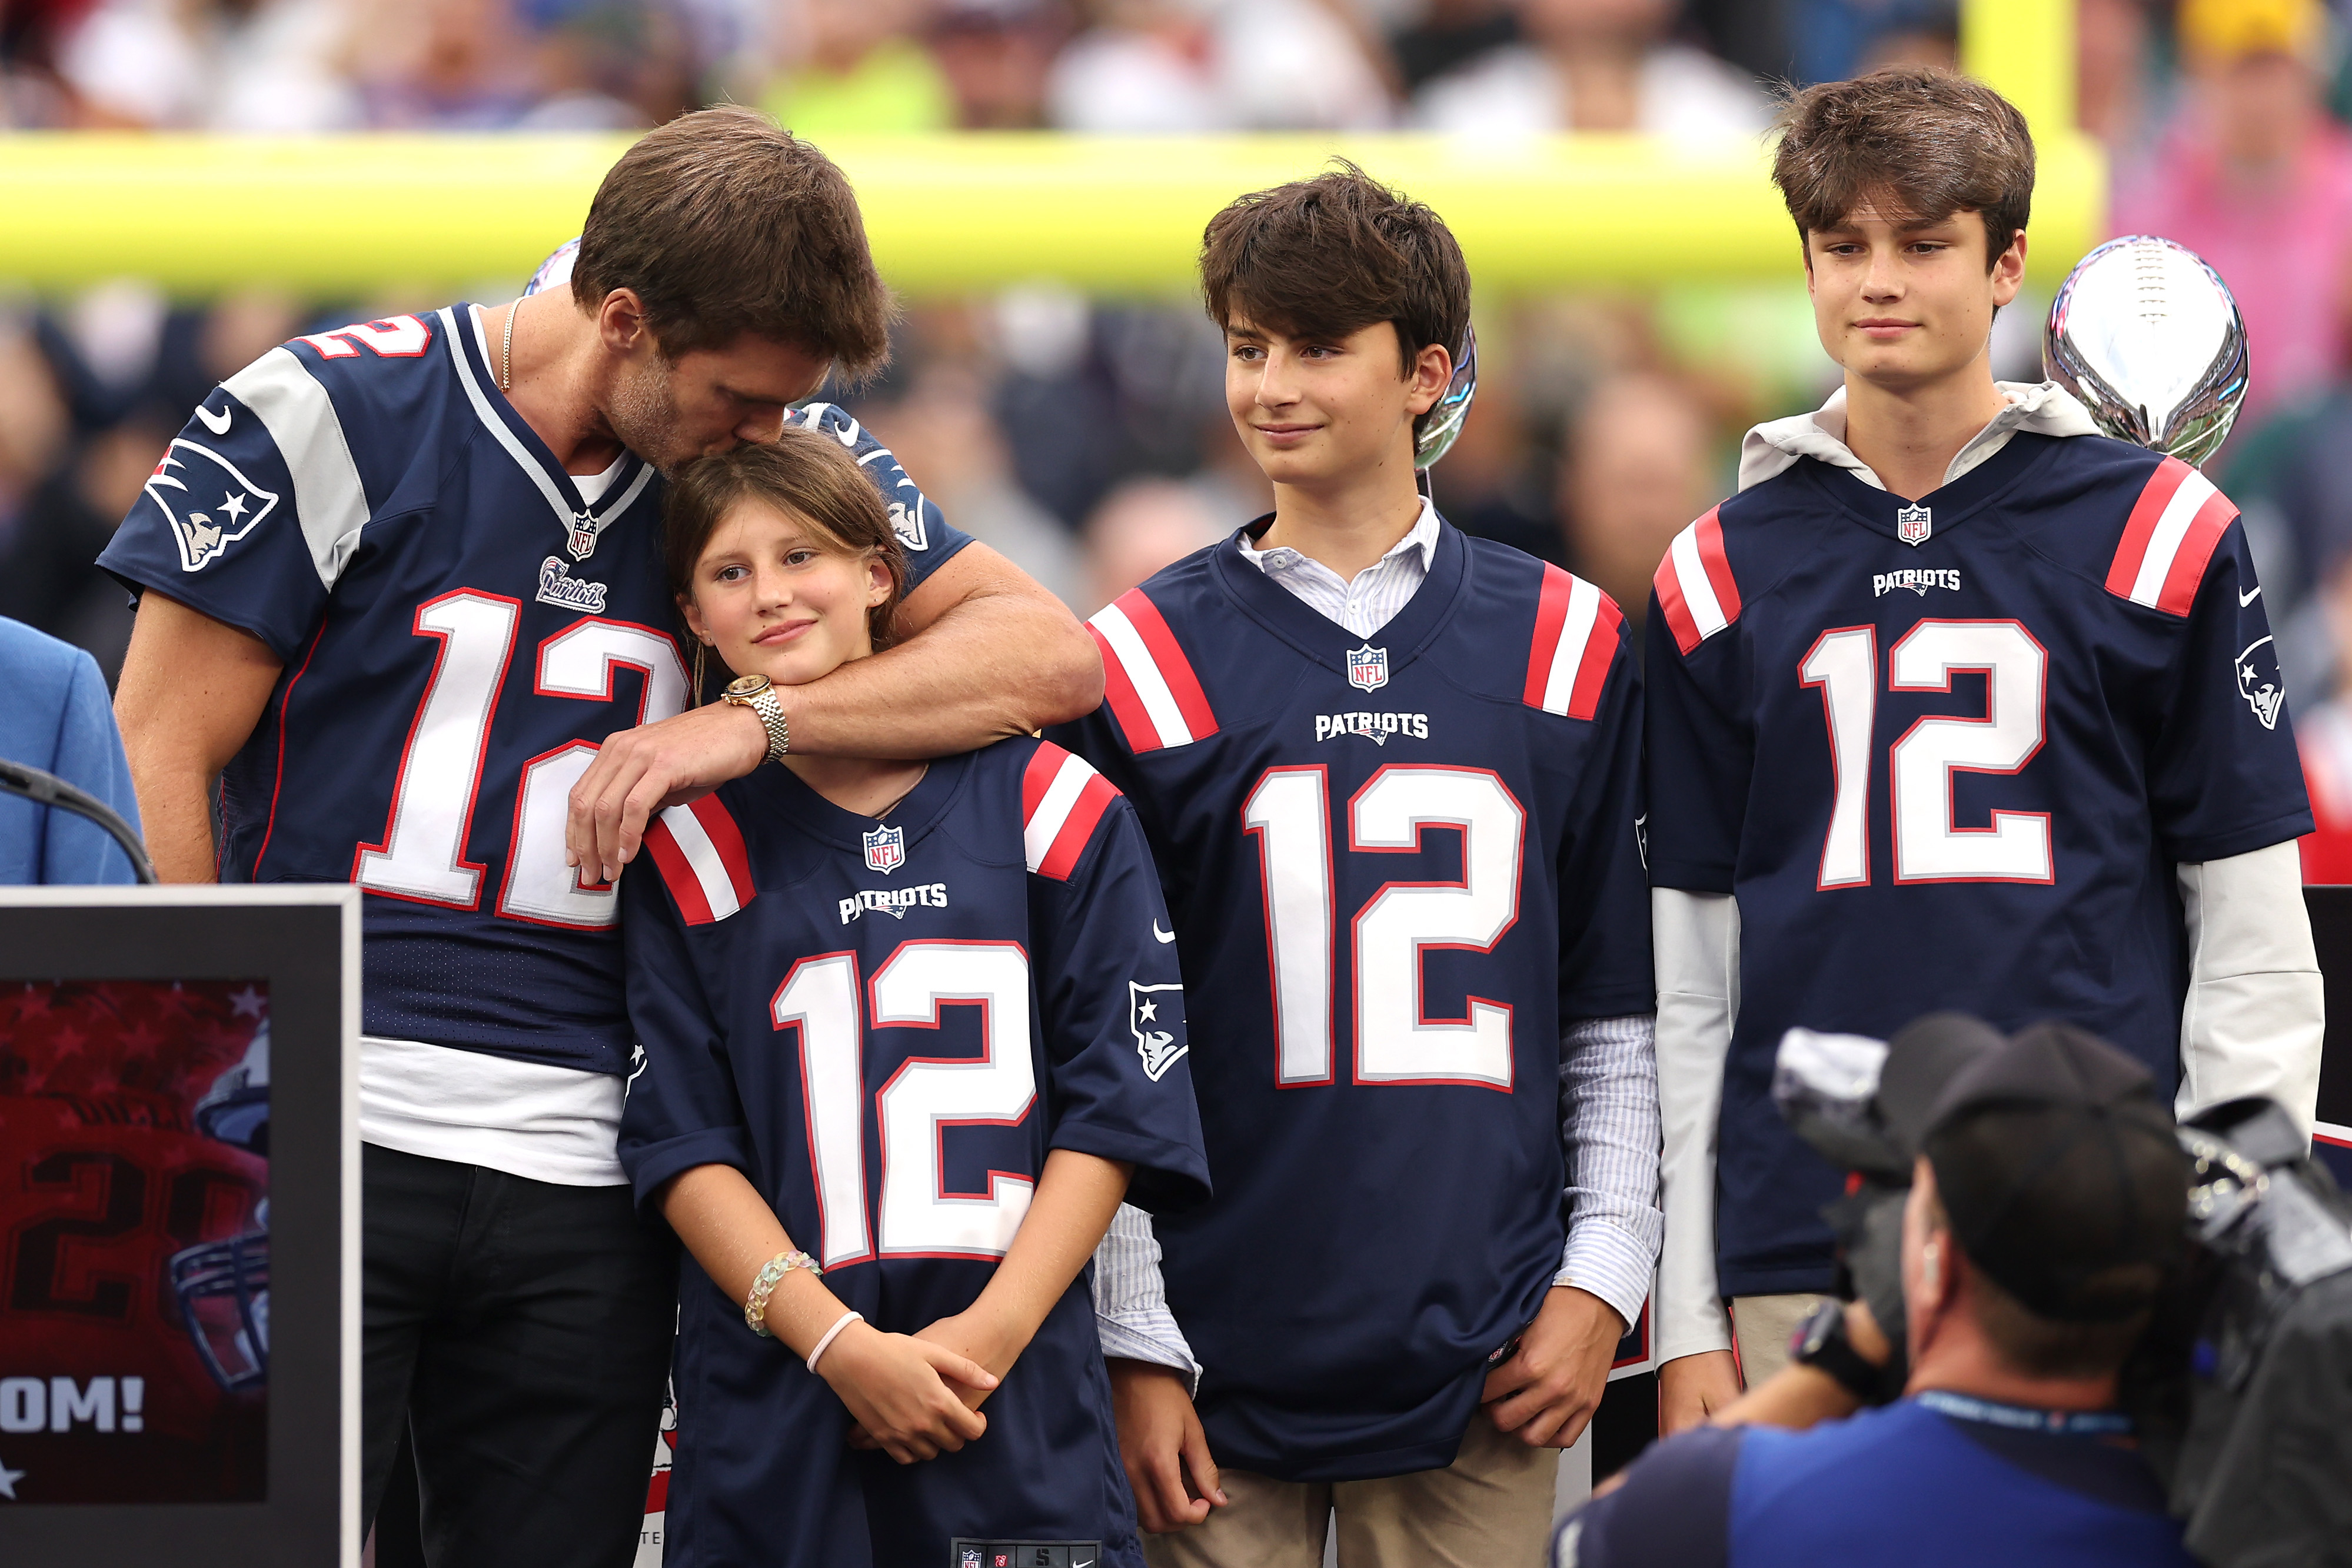 Tom Brady hugging a child, with two others beside him, all in Patriots jerseys at a stadium event